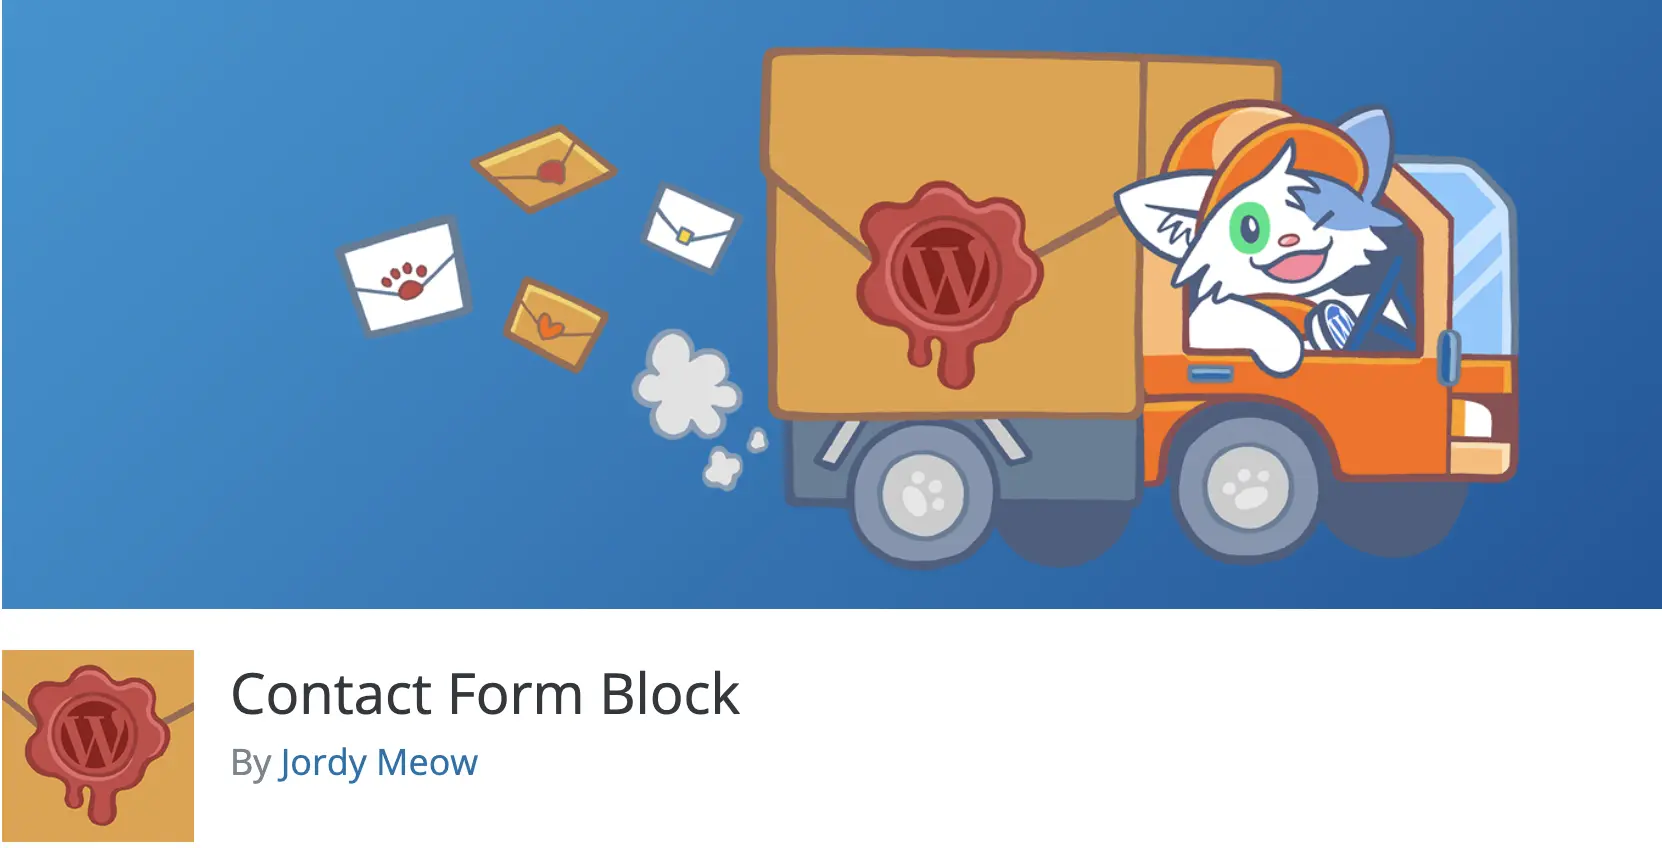 Contact Form Block by Jordy Meow